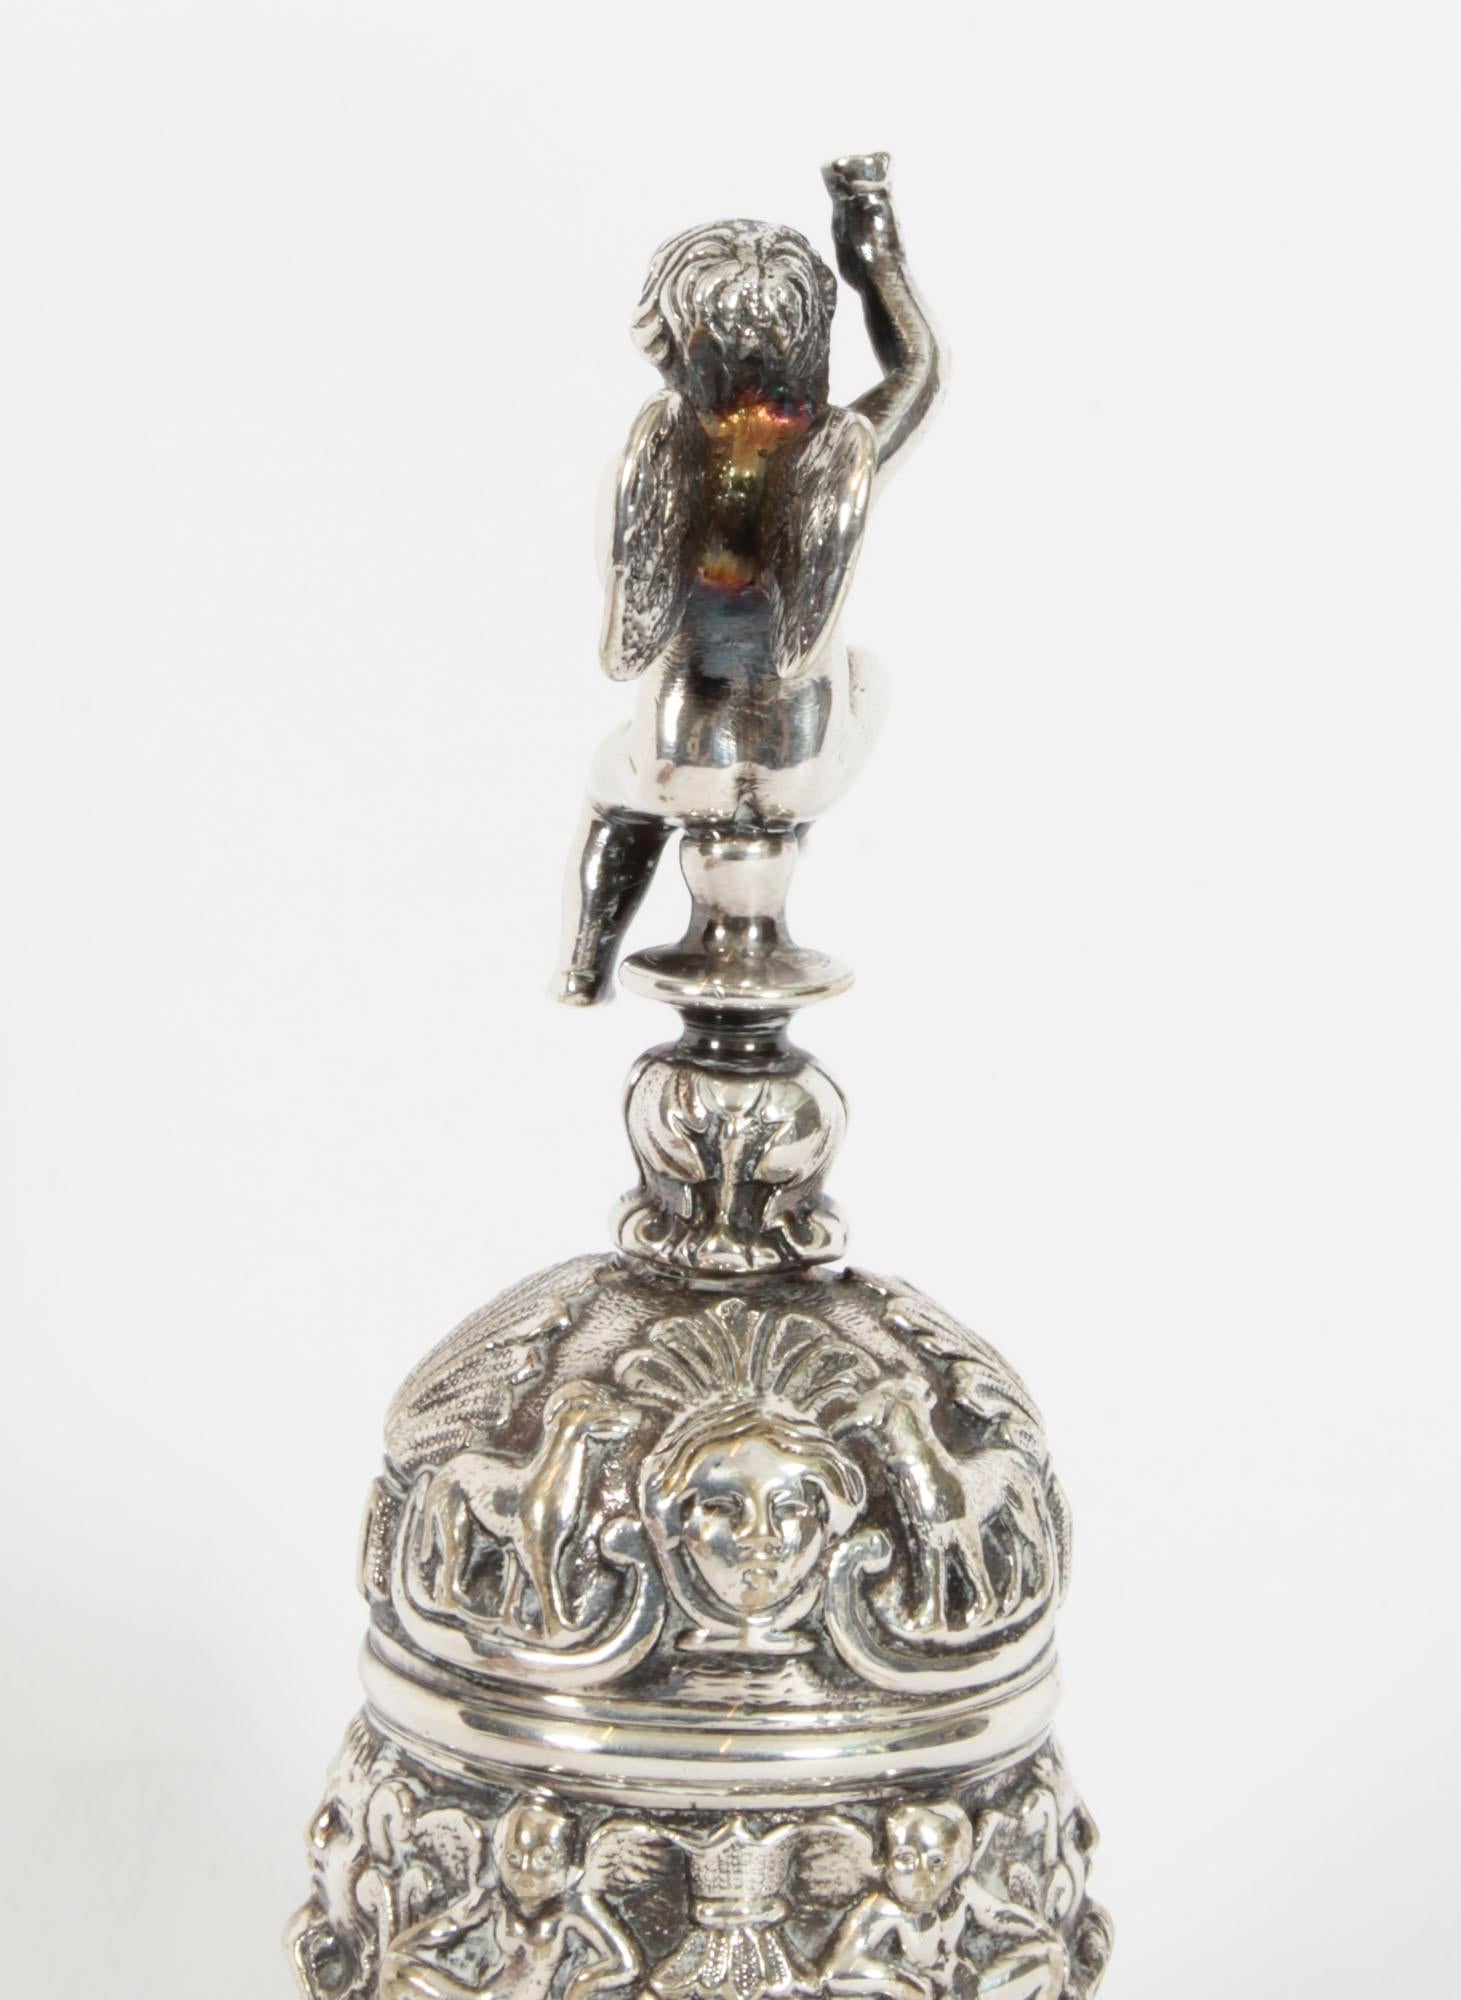 Antique Silver Plated Hand Bell Renaissance Revival 19th Century 8